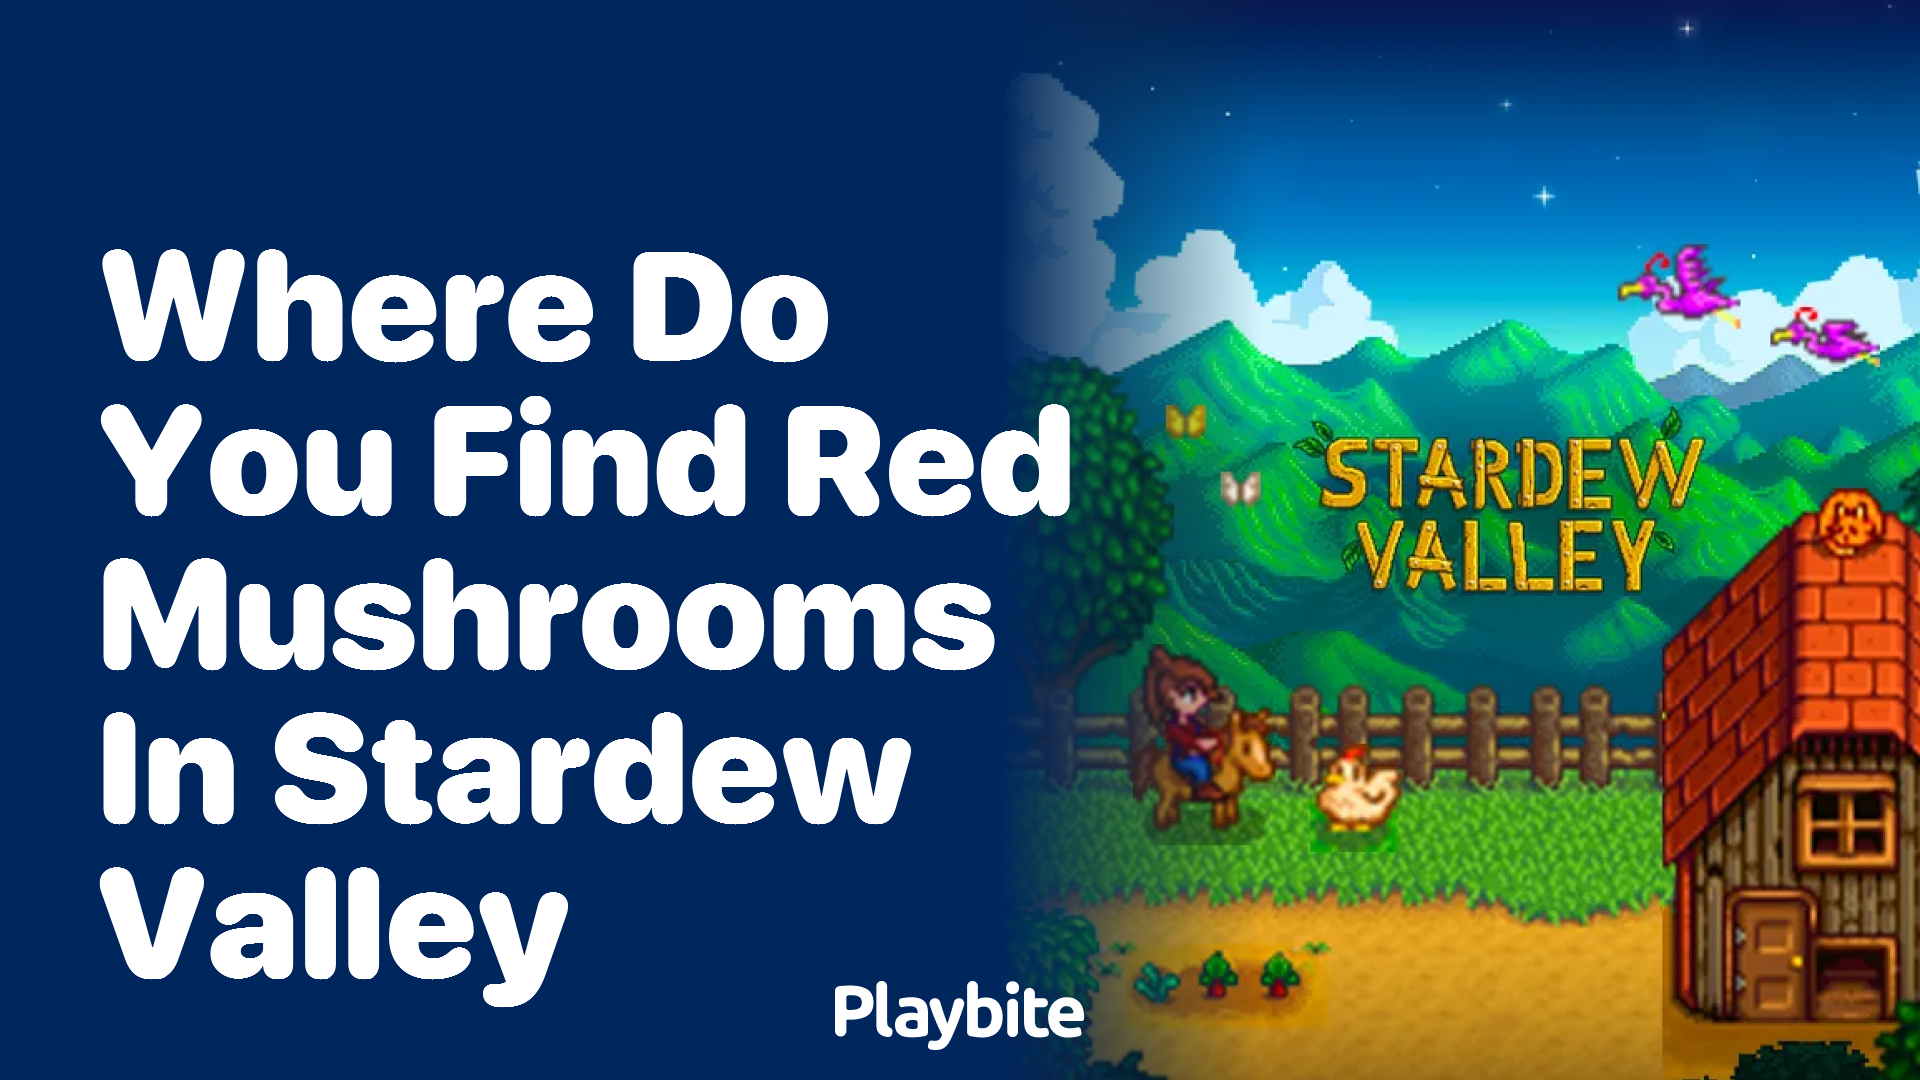 Where do you find red mushrooms in Stardew Valley?